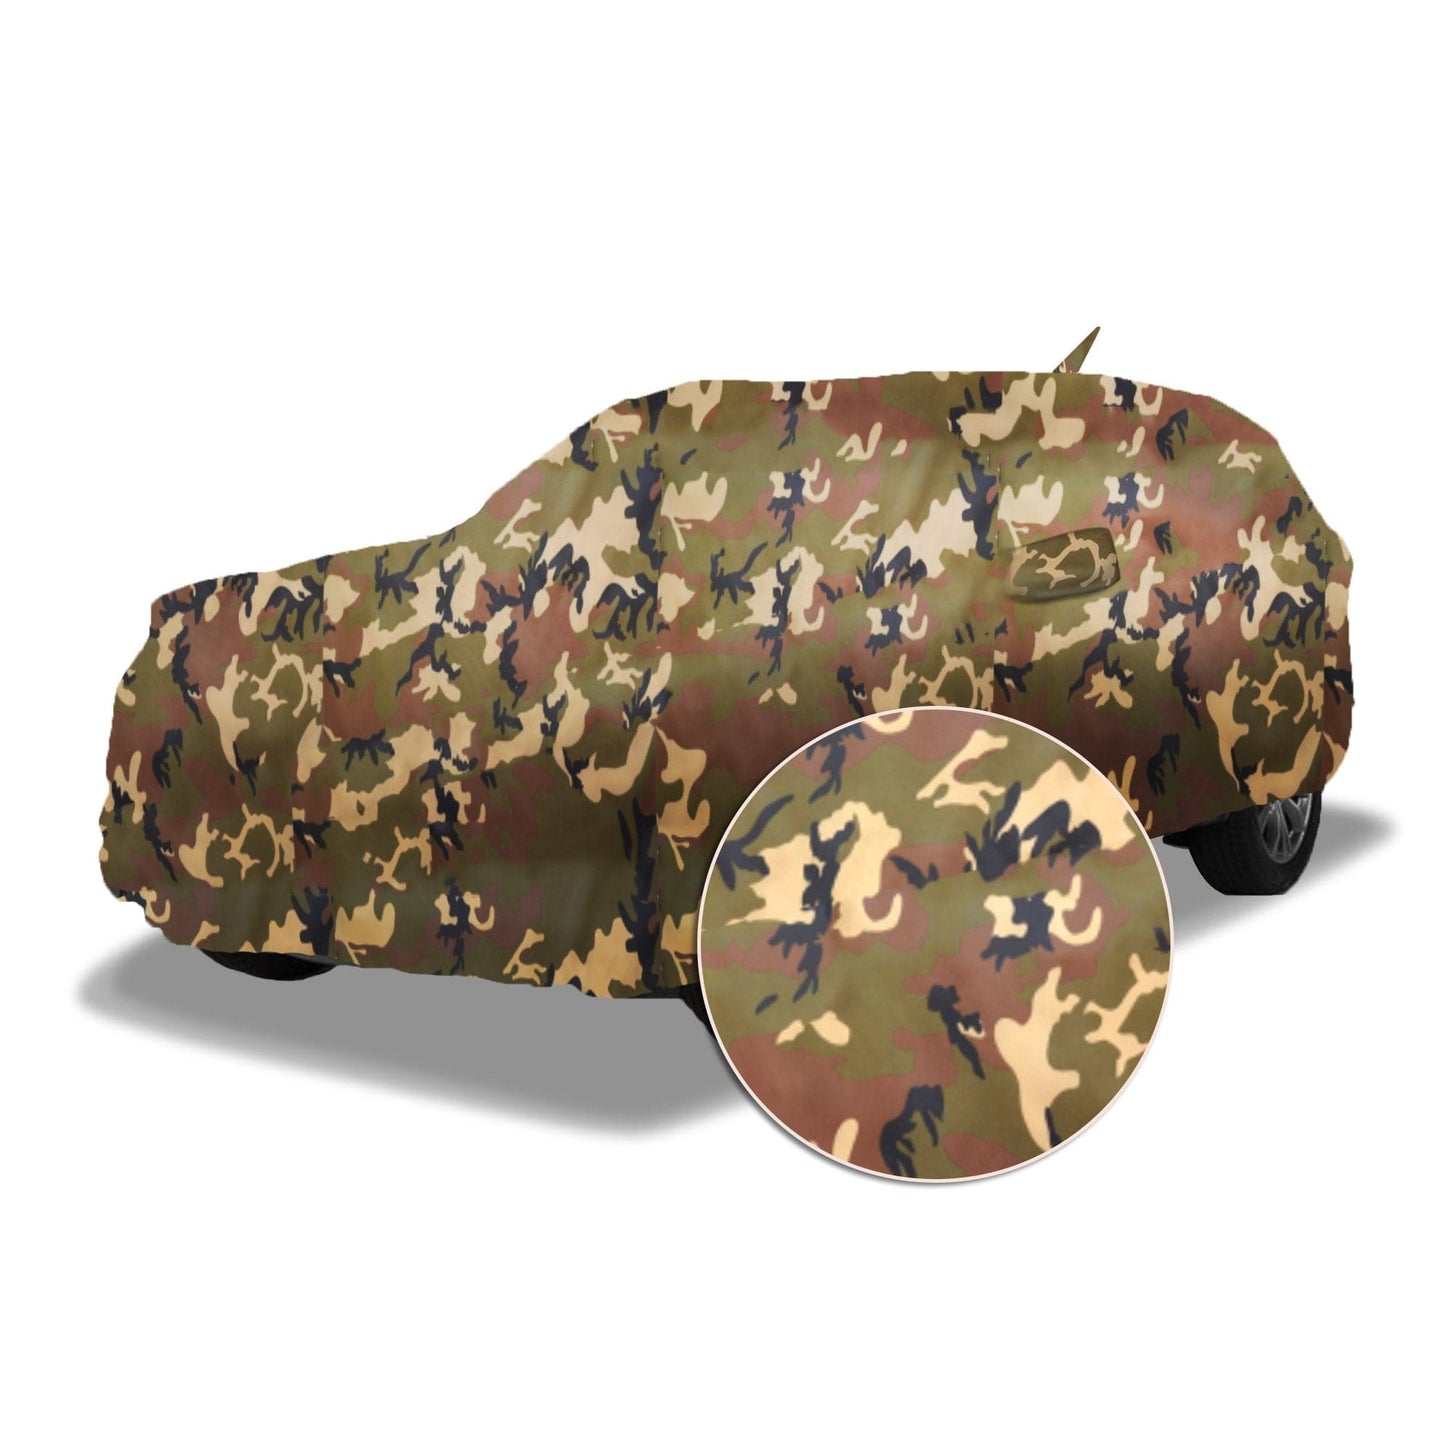 Ascot Mahindra Scorpio-N Car Body Cover 2023 Model Extra Strong & Dust Proof Jungle Military Car Cover with UV Proof & Water-Resistant Coating